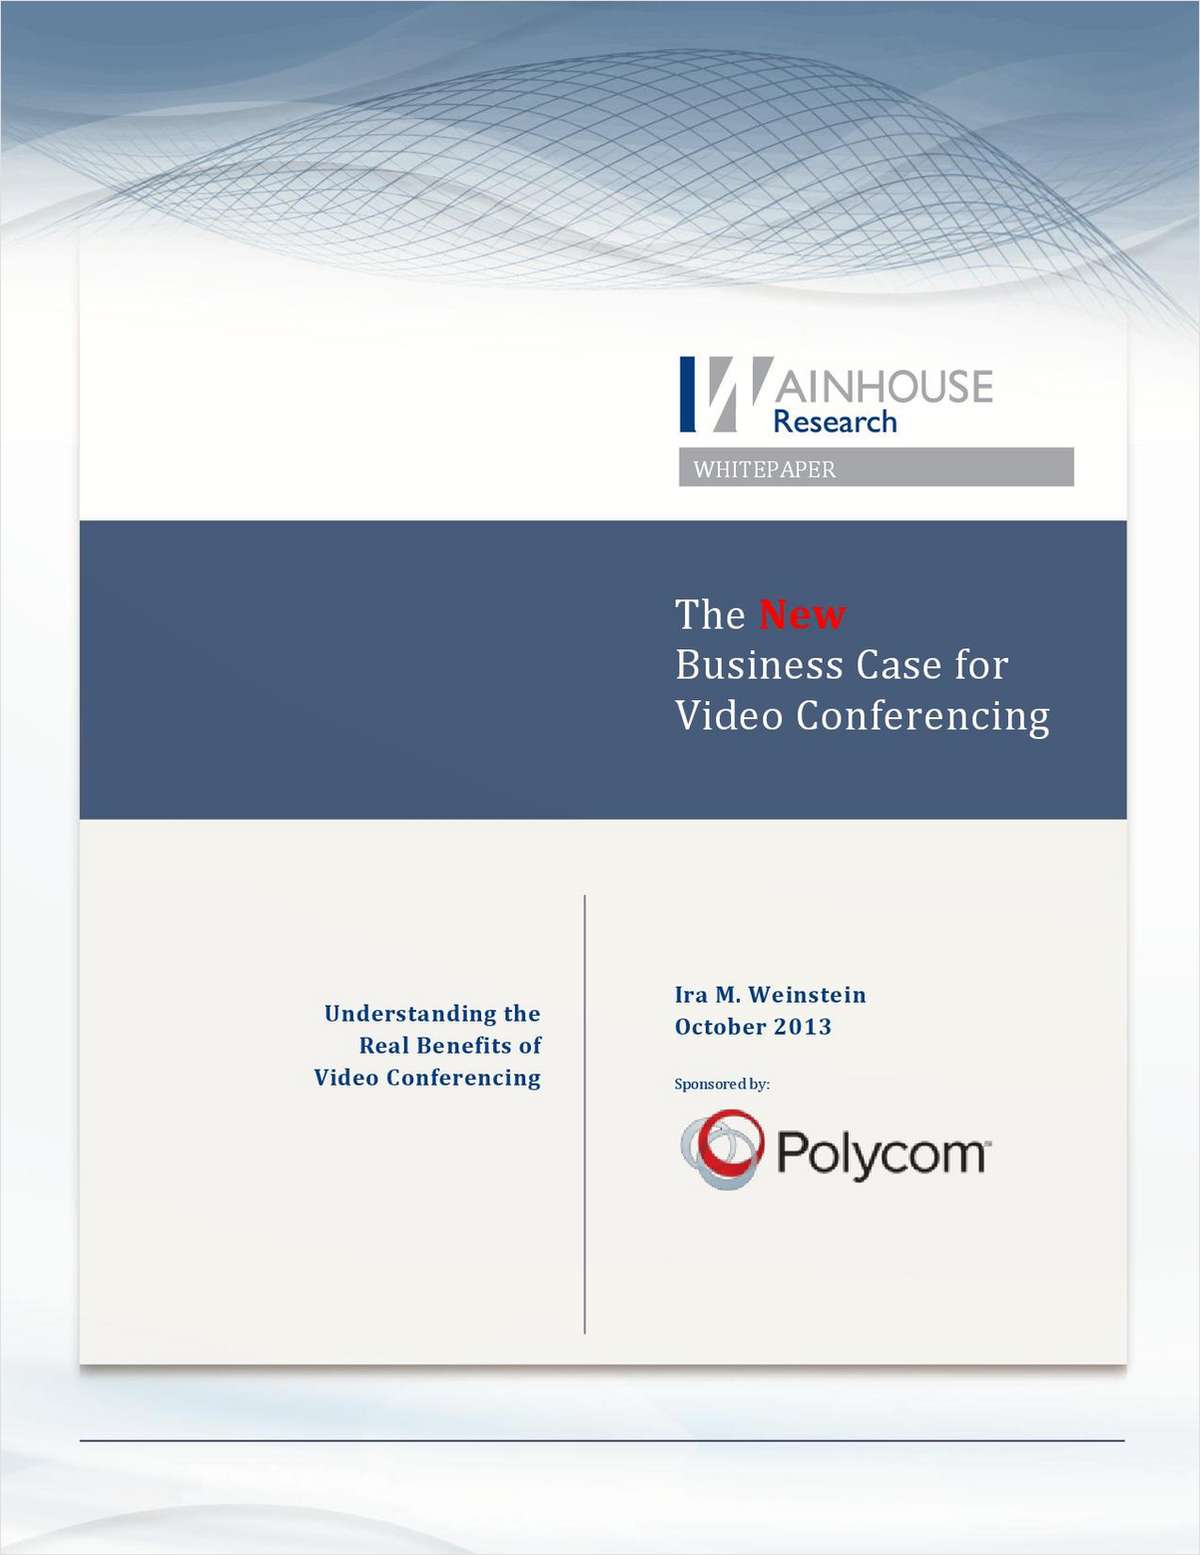 The New Business Case for Video Conferencing: 7 Real-World Benefits Beyond Cost-Savings